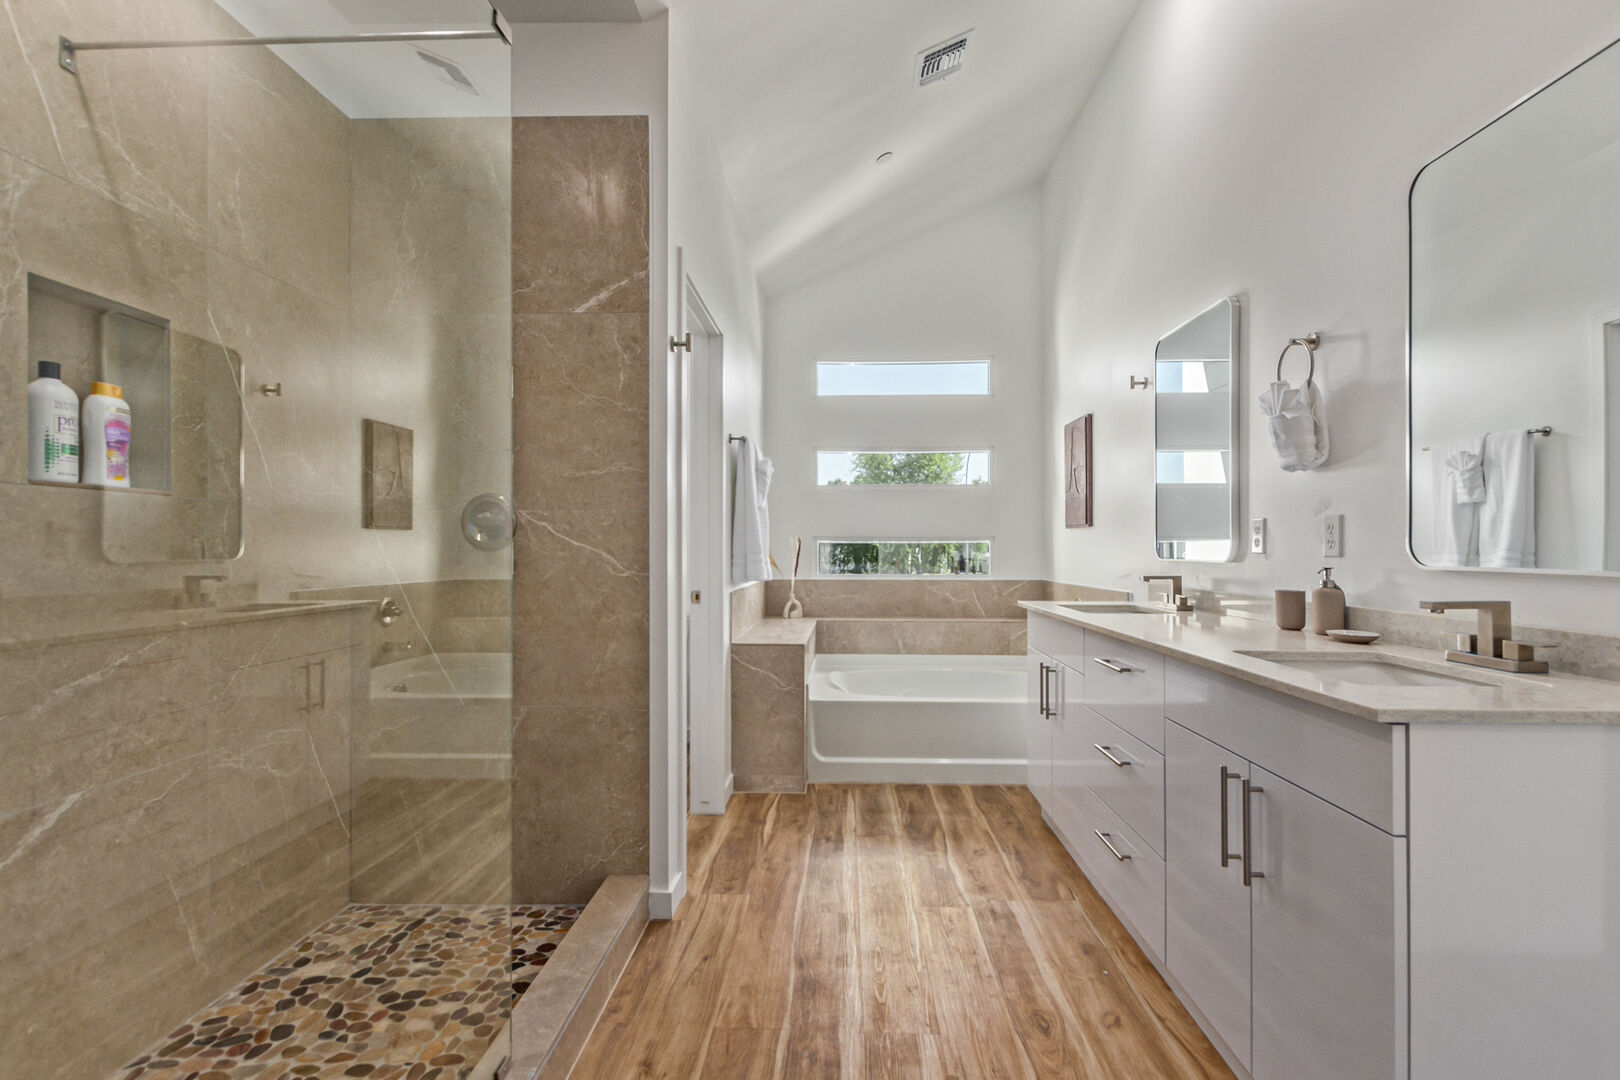 Primary bathroom with dual vanities, large tub, and large stand-in shower.